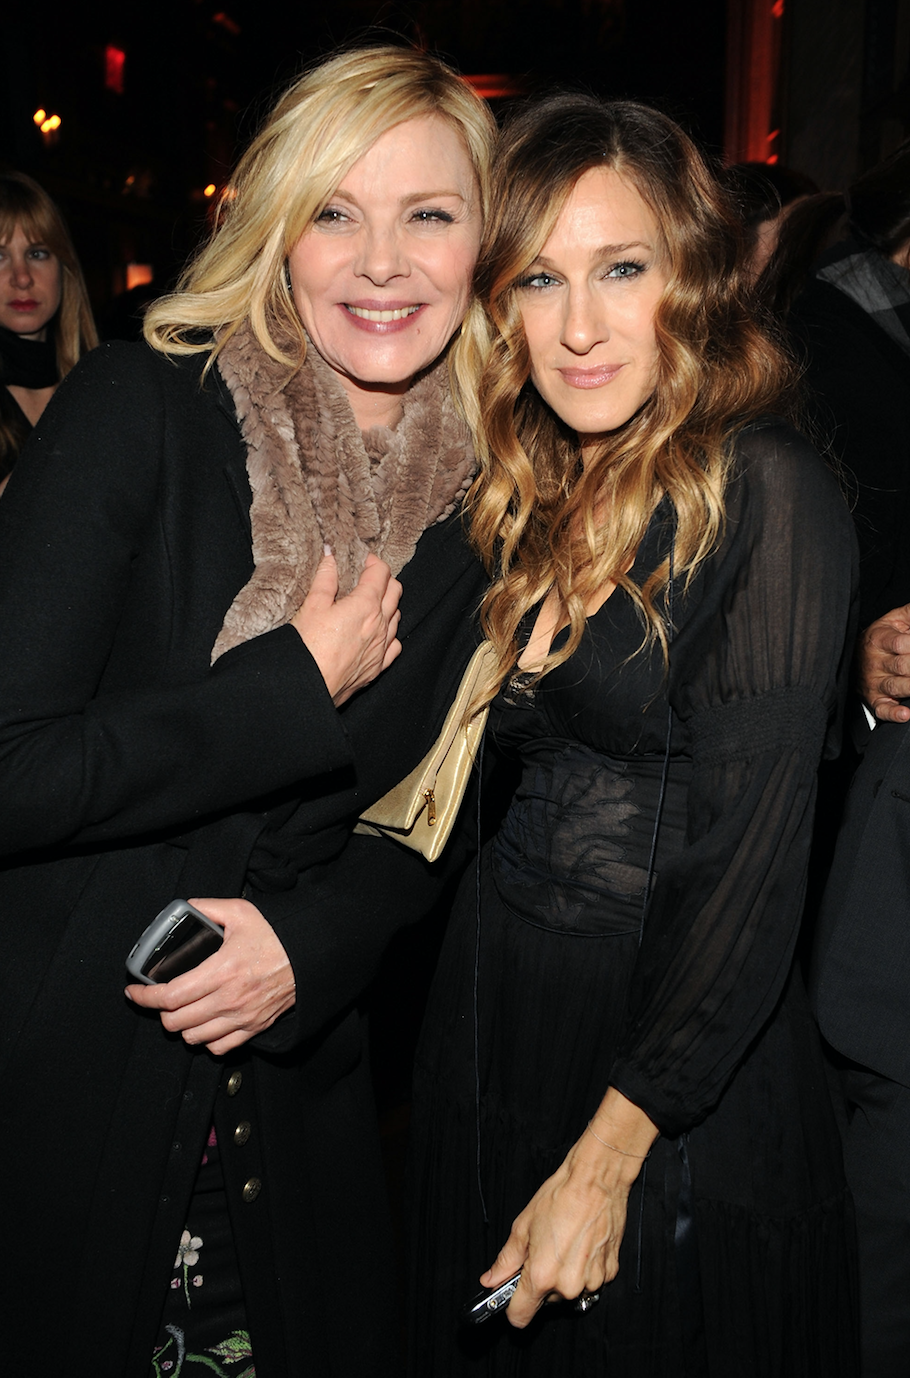 Kim Cattrall and Sarah Jessica Parker attend the premiere of 'Did You Hear About the Morgans?'